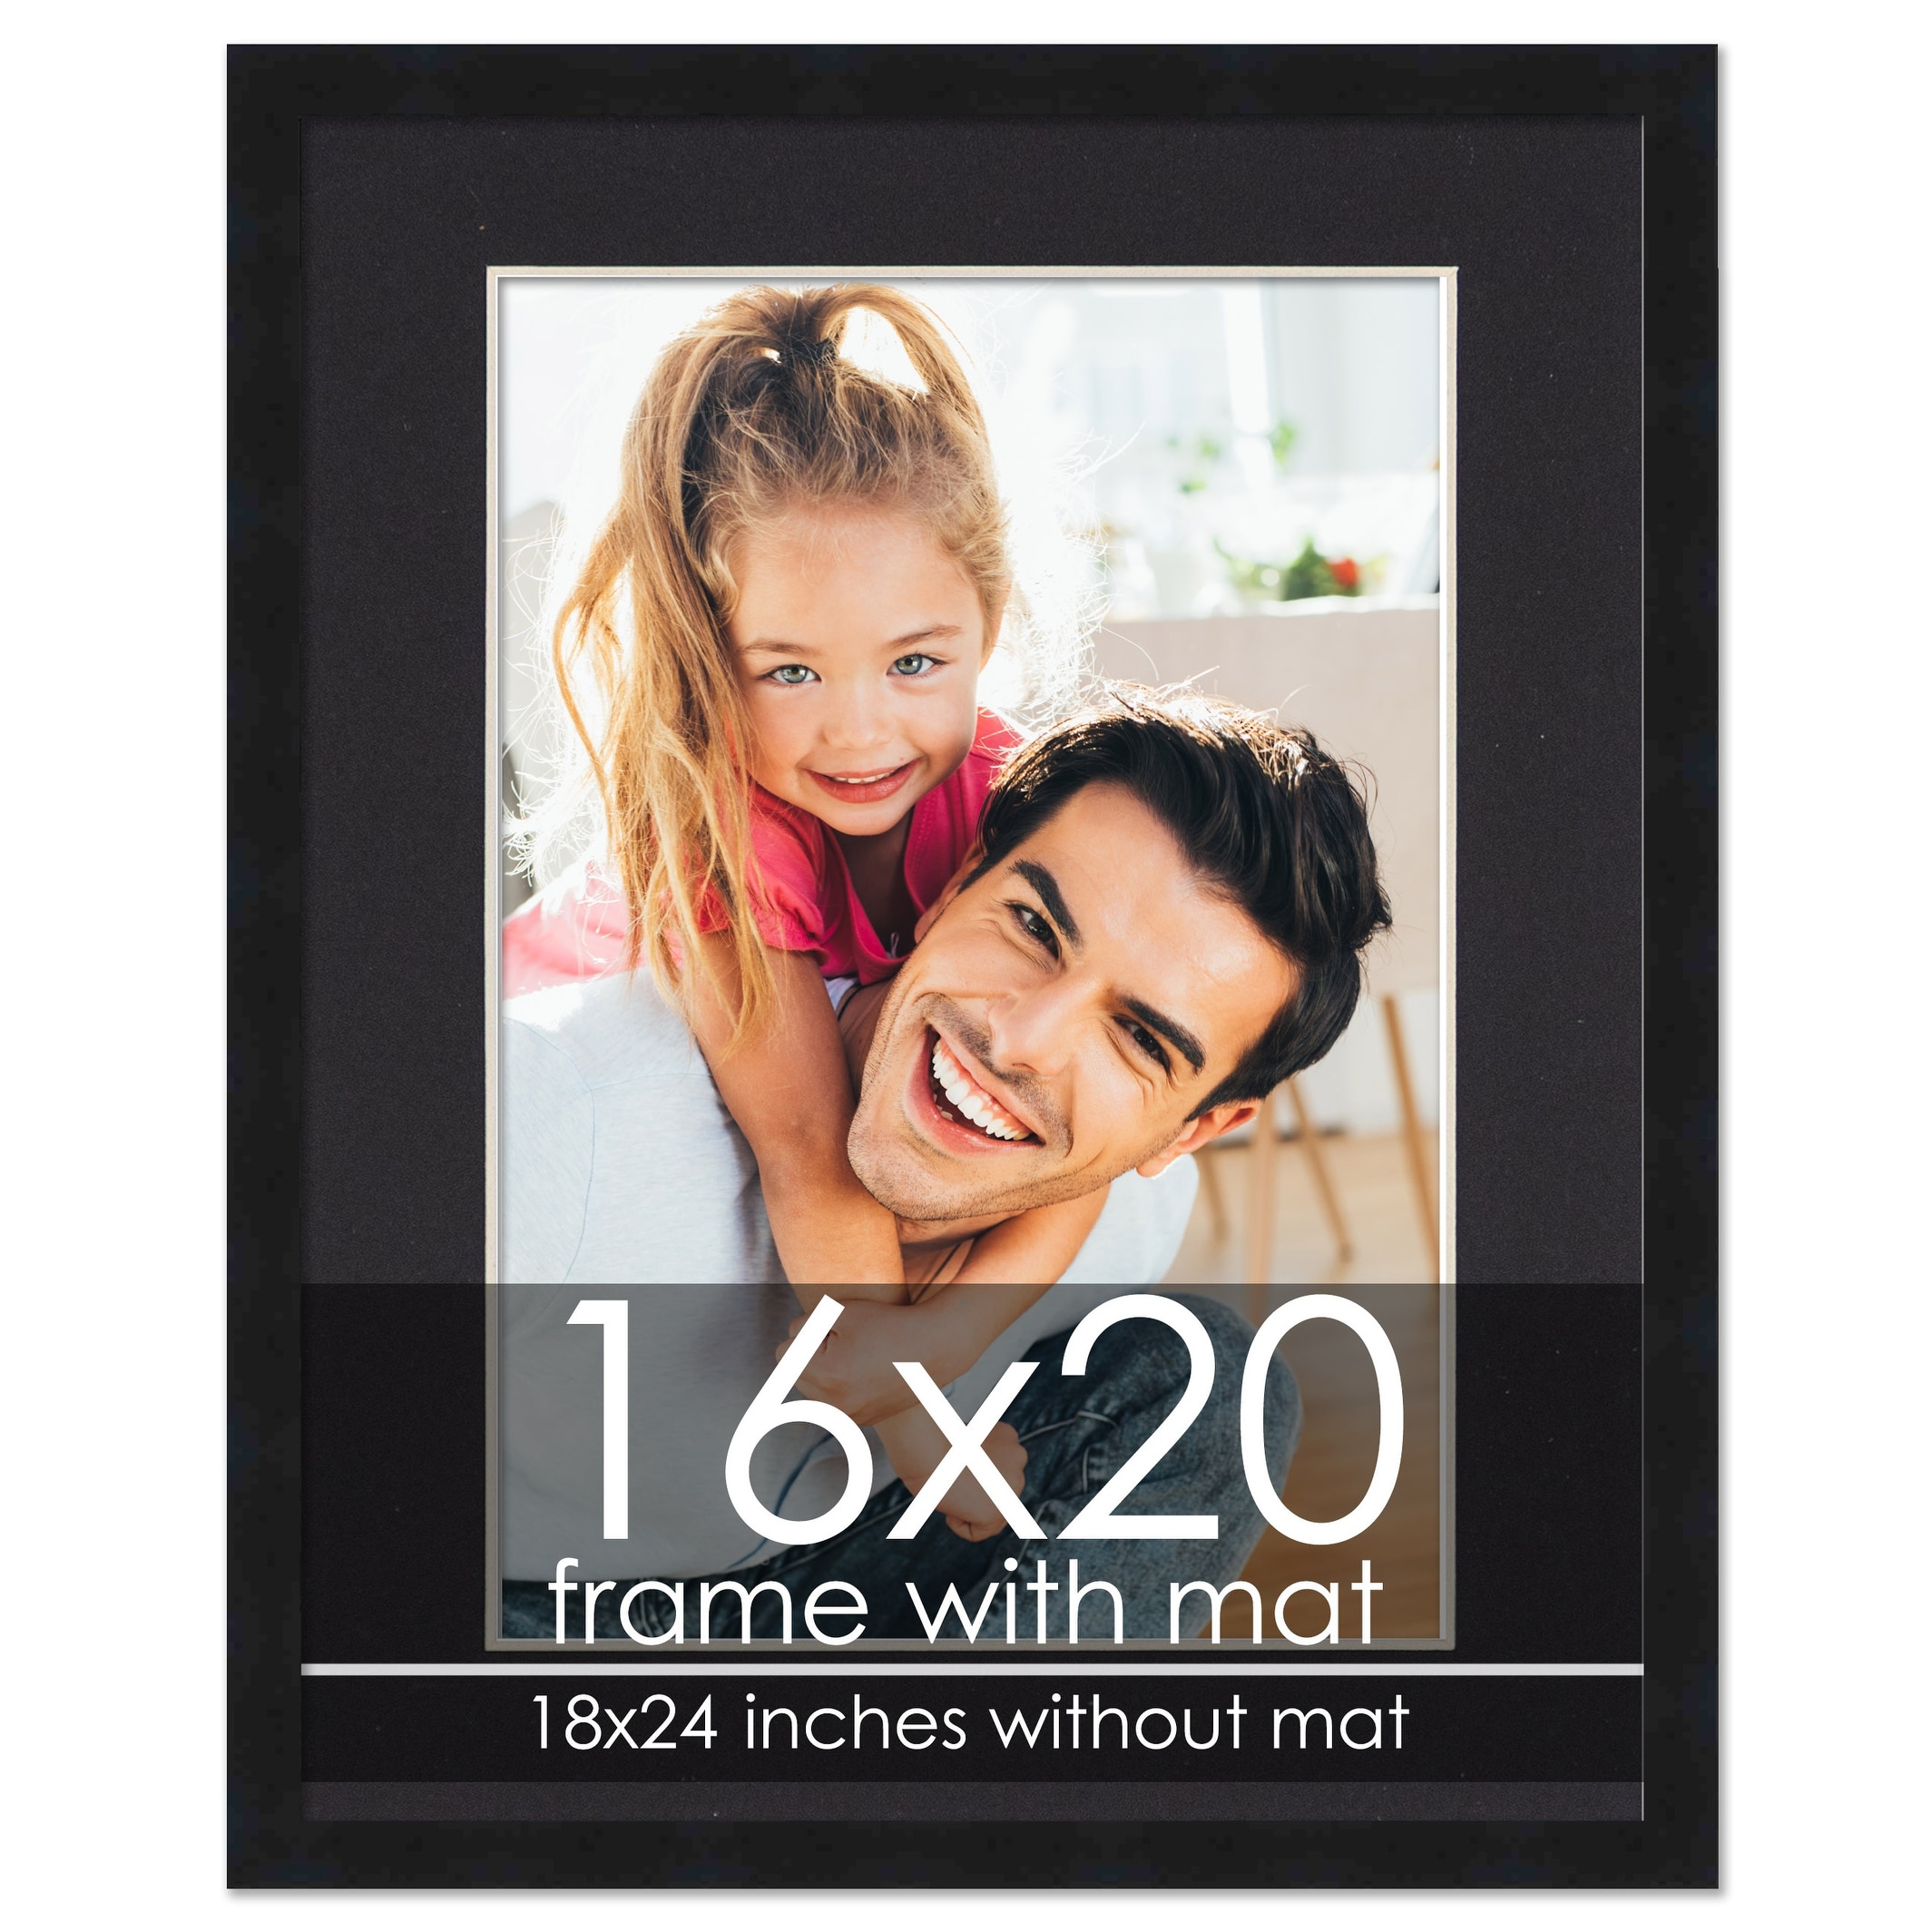 16x20 Wood Wall Mount Large Poster Frame, Grey Wash, 16 x 20 